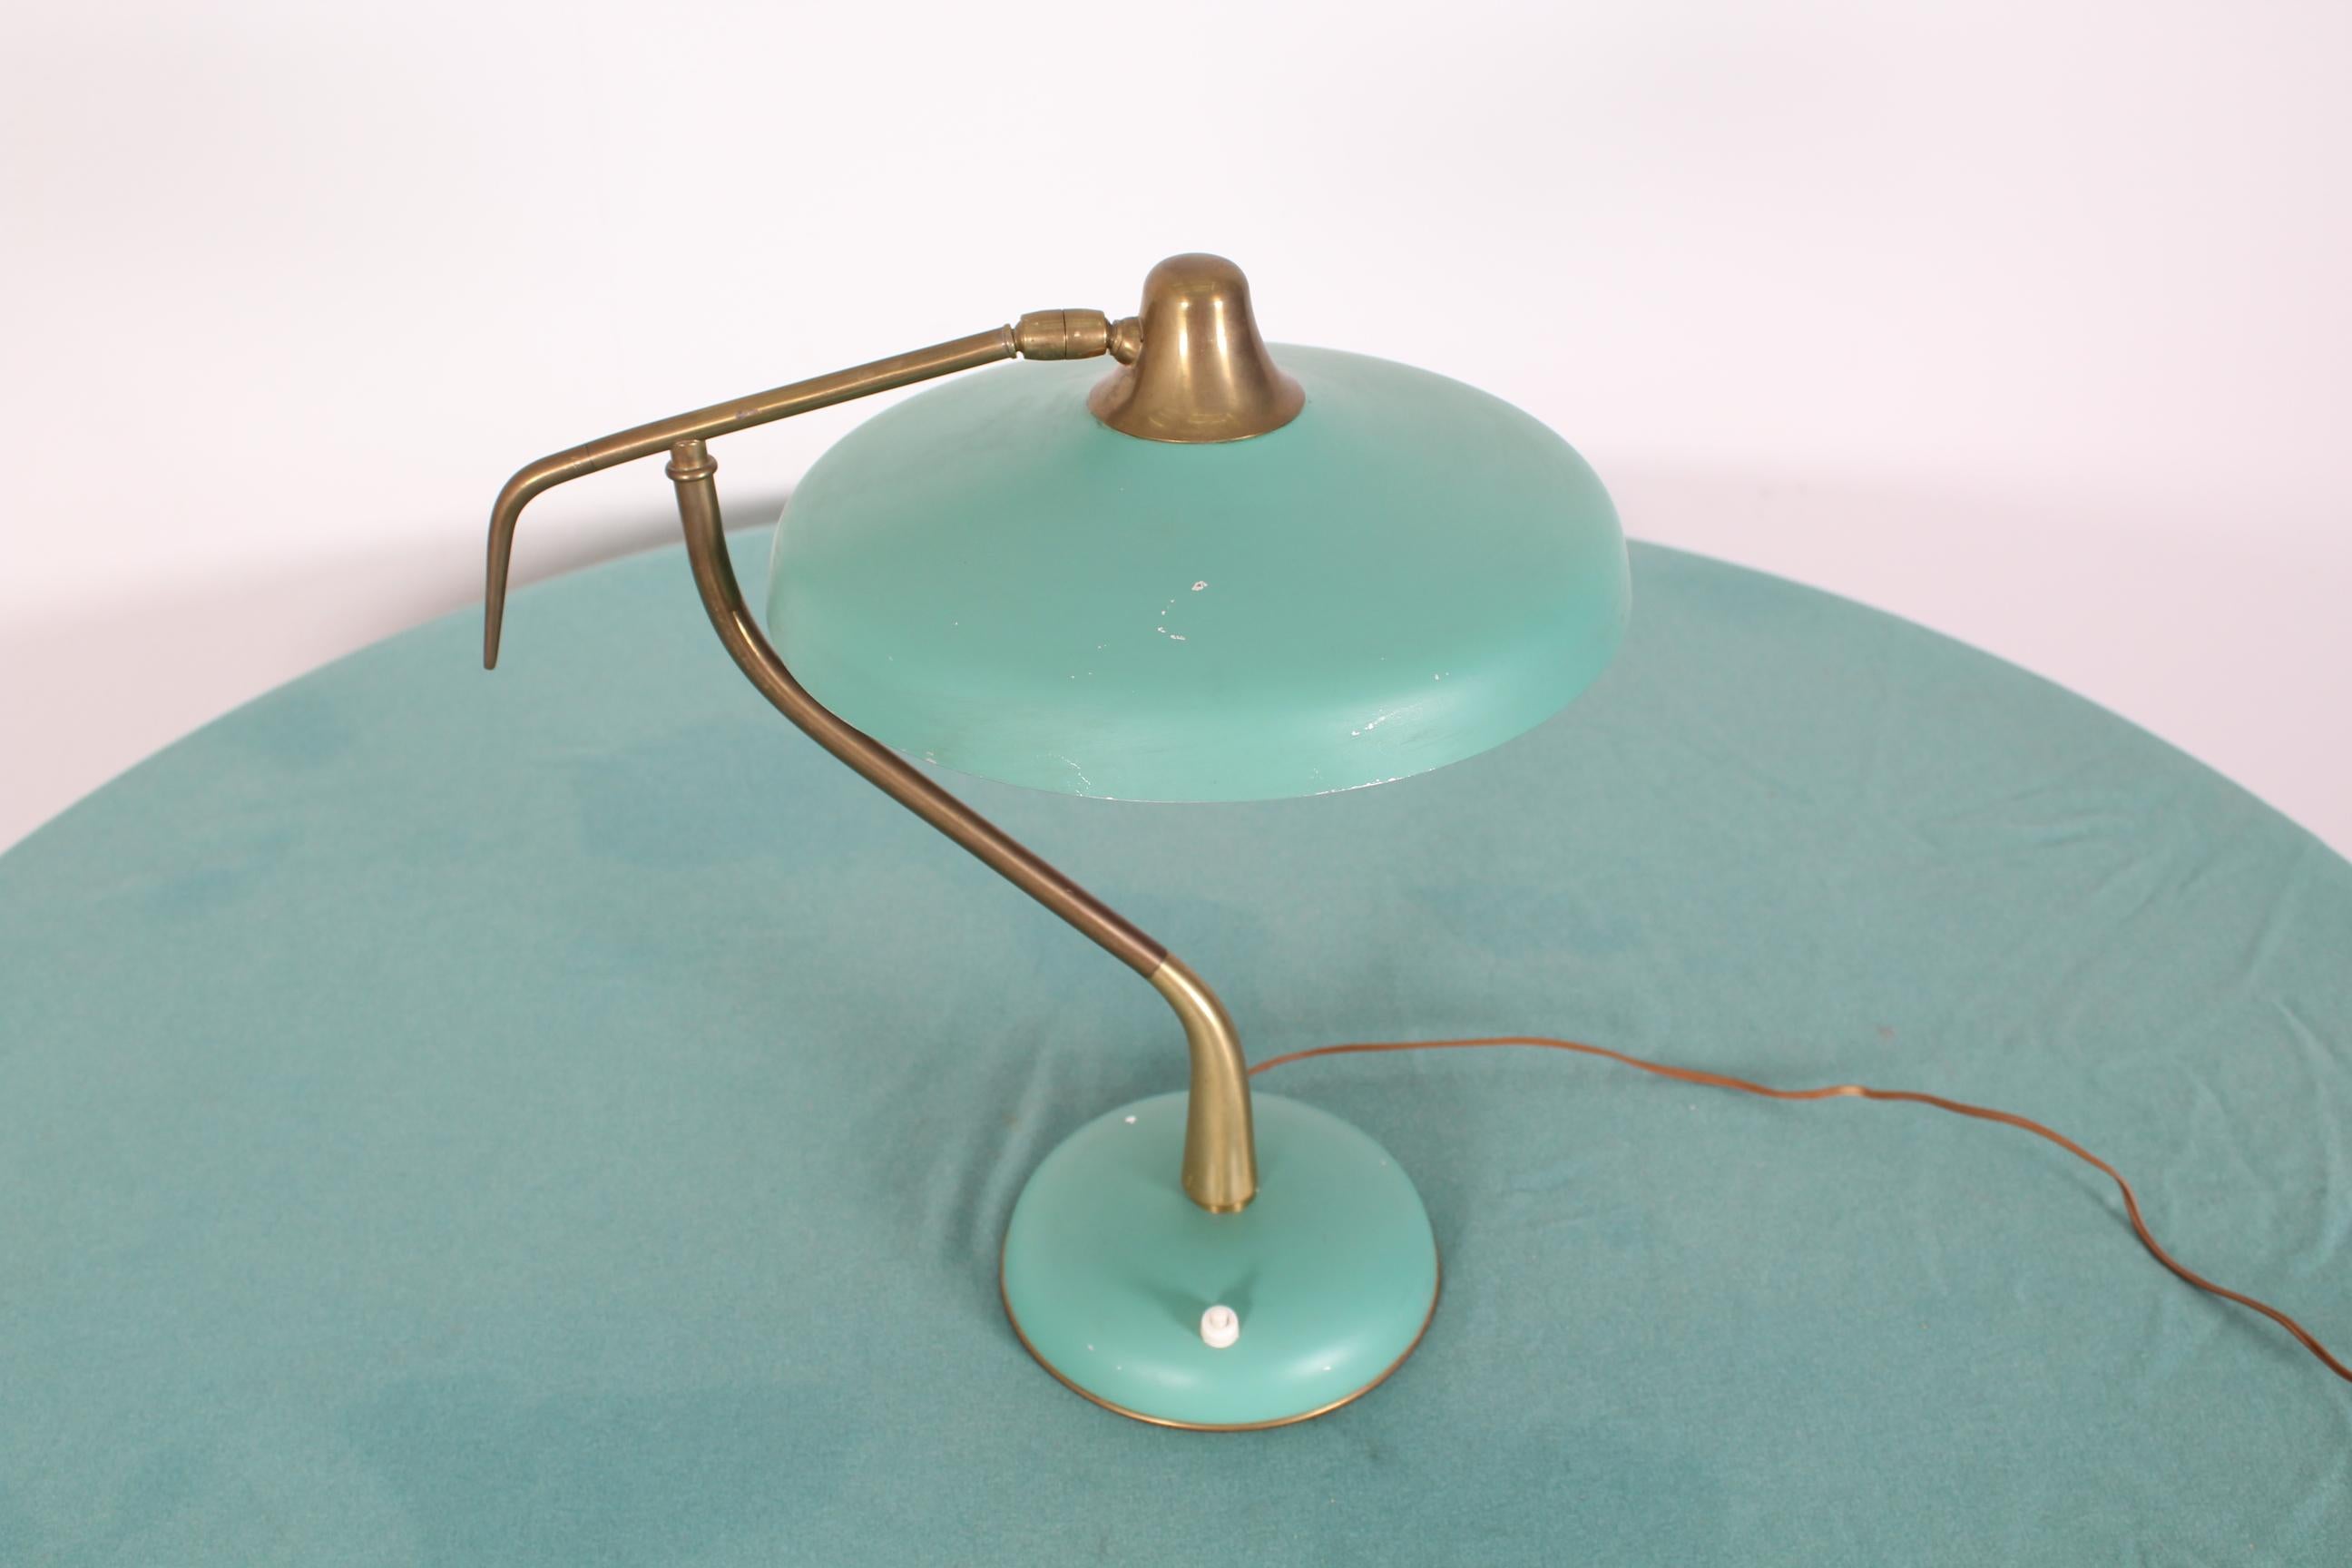 Original 20th century table lamp designed in 1950 by Oscar Torlasco for Lumi Milano, Italy. Wear consistent with age and use.